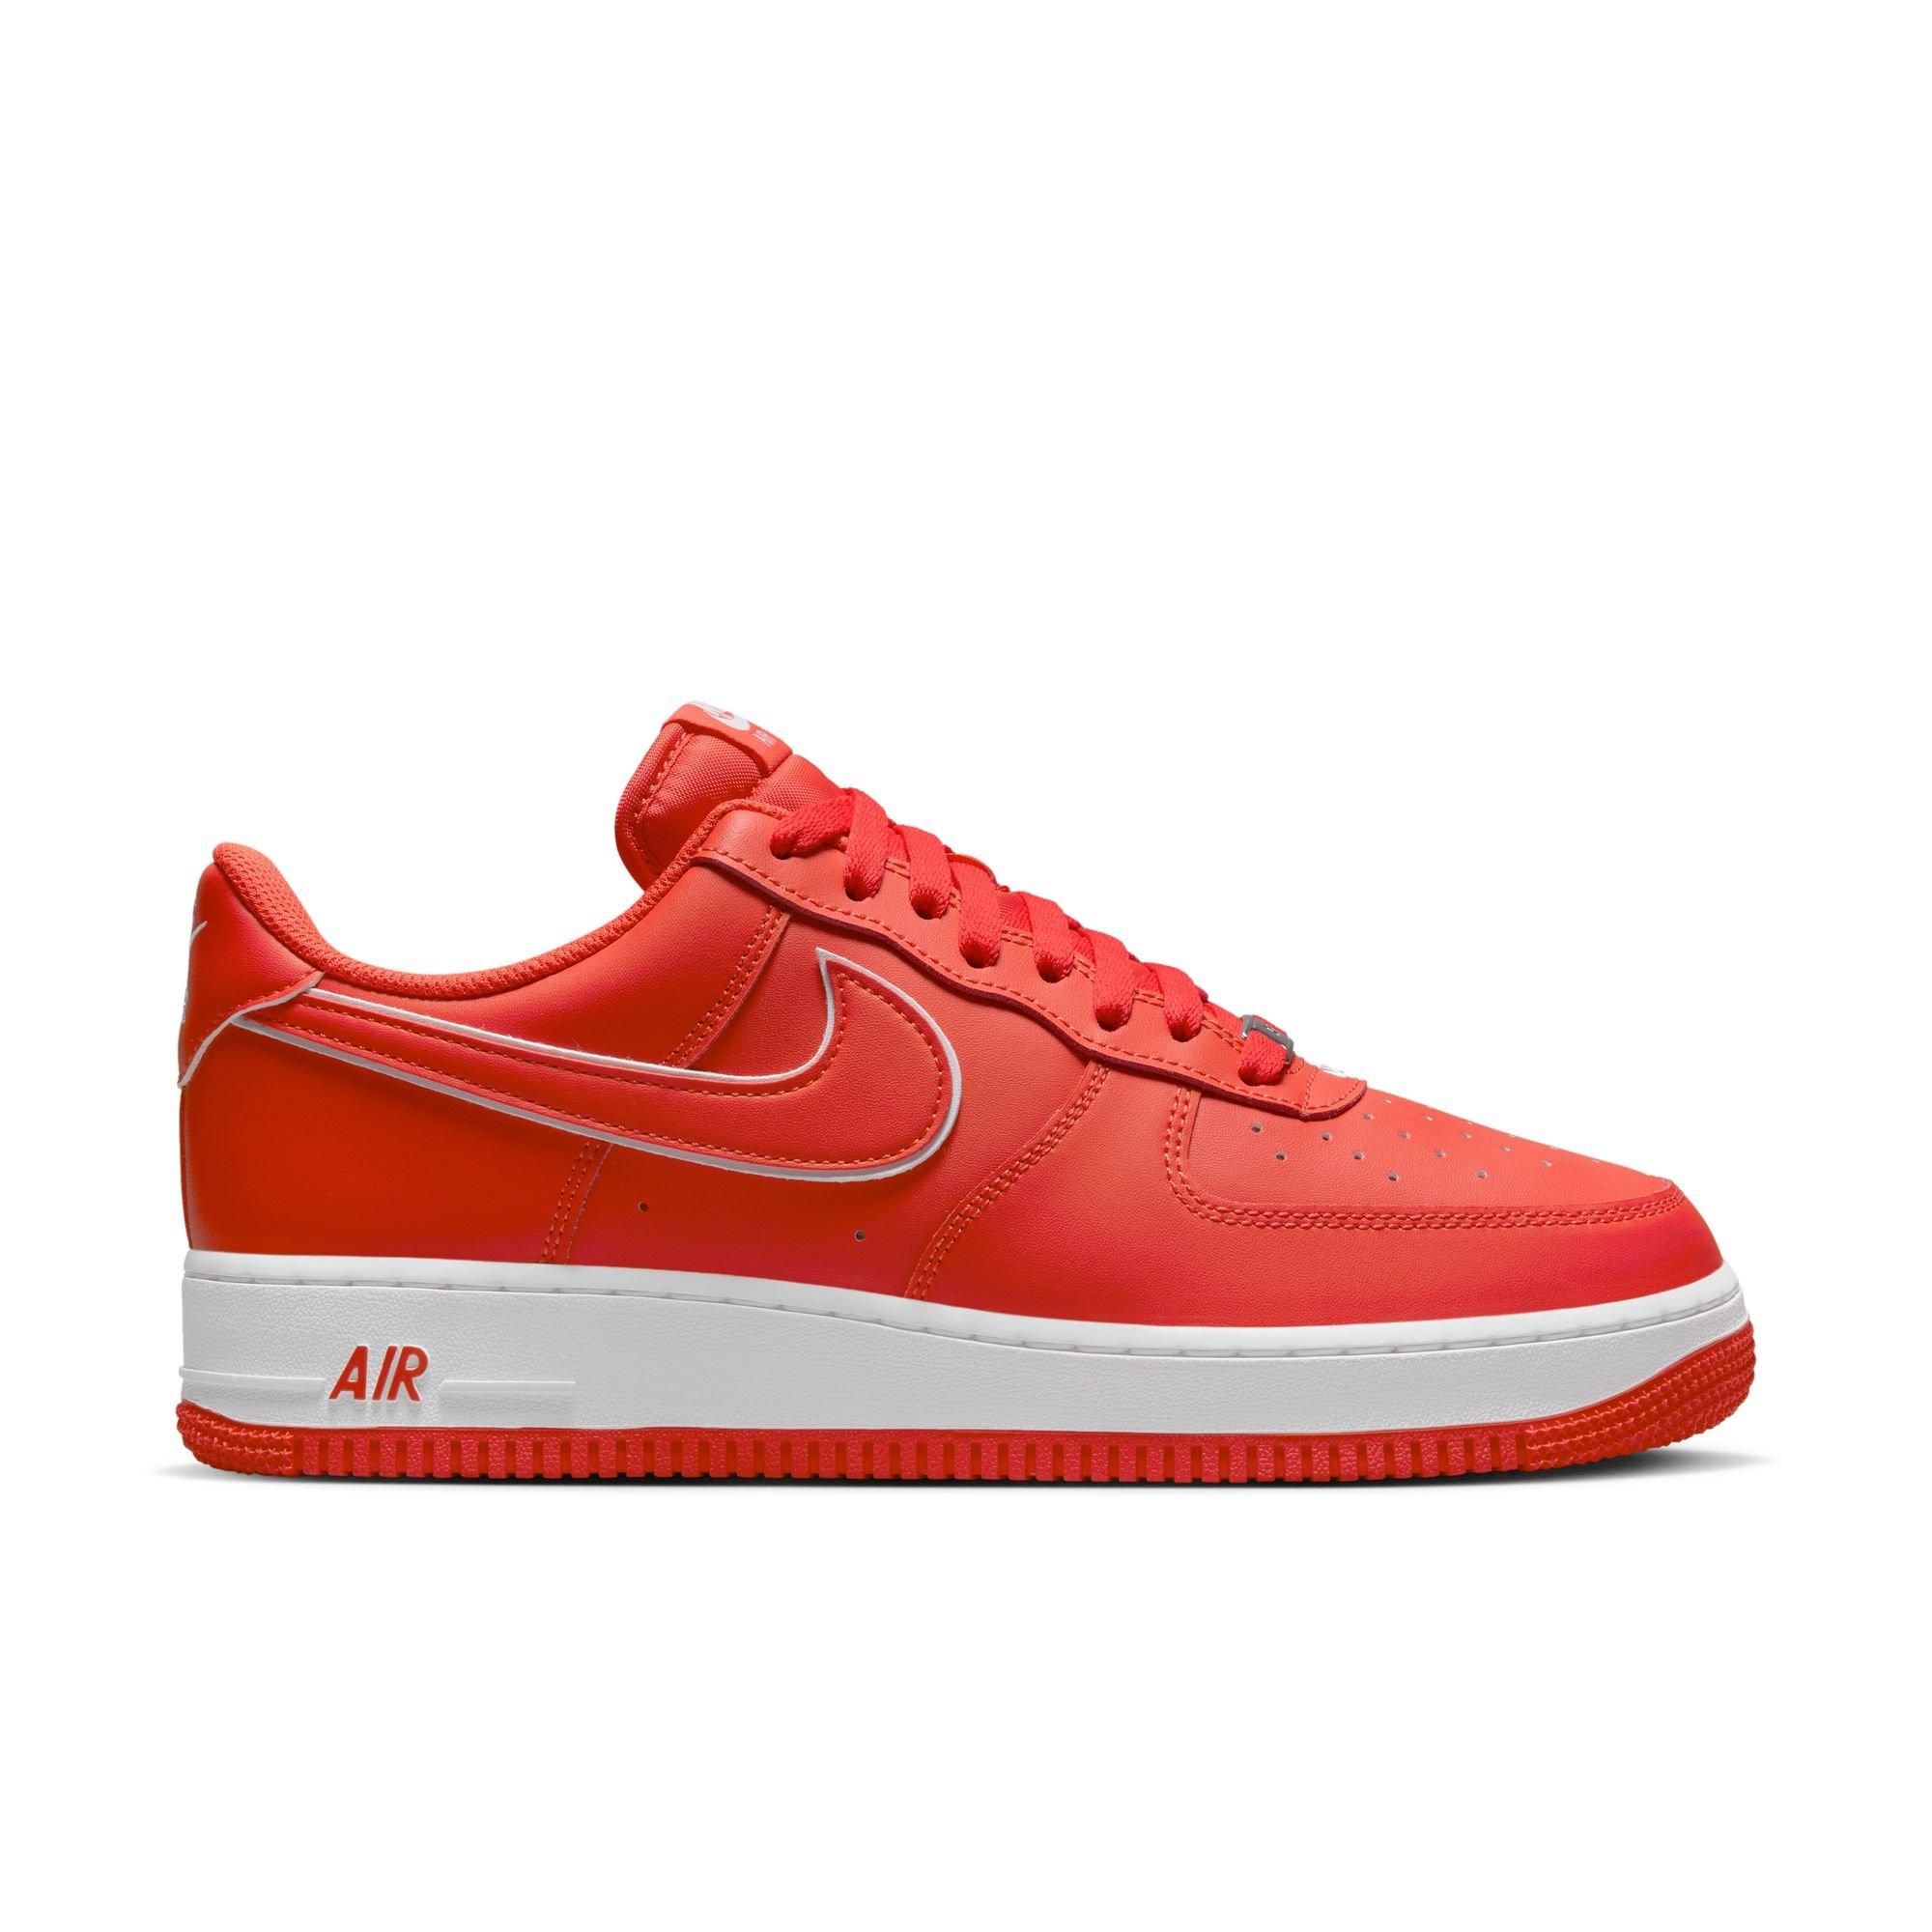 Nike Air Force 1 '07 LV8 Men's Shoes Size-7.5